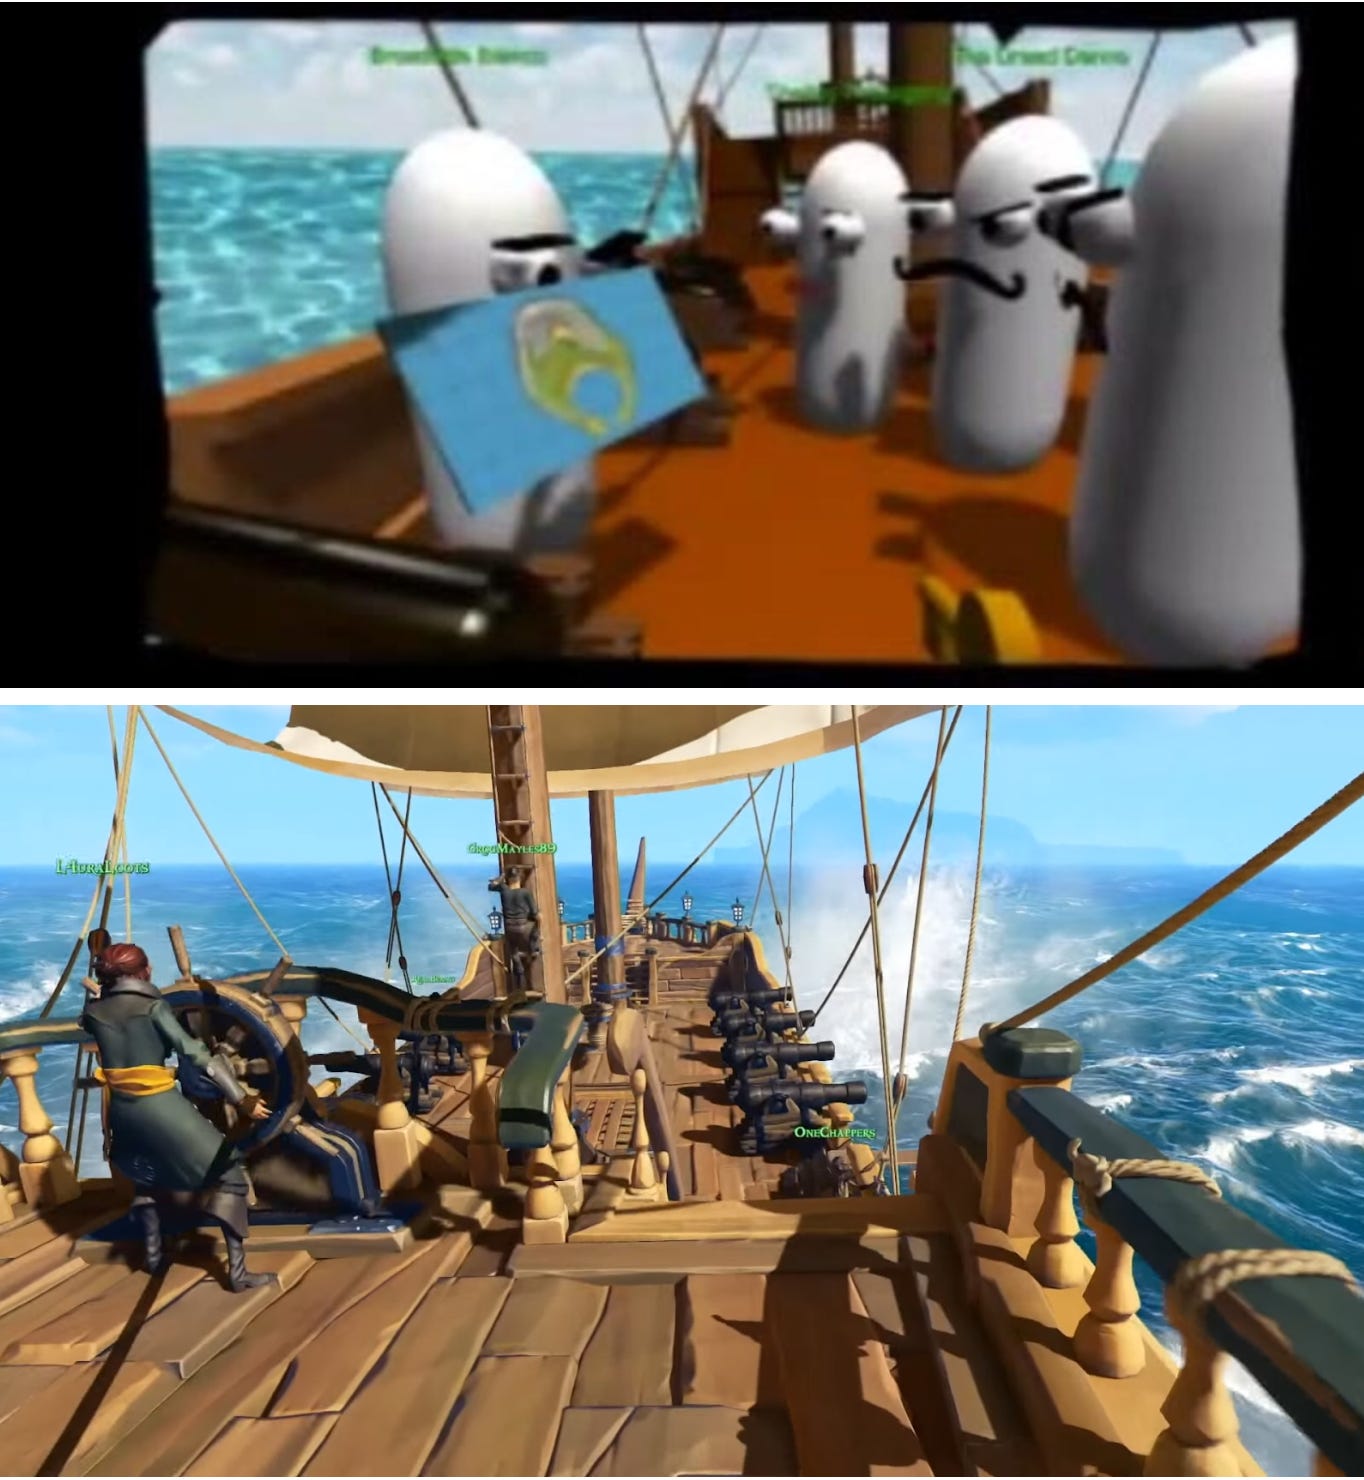 Prototype vs final version. Top image: The prototype of Sea of Thieves (Rare, 2018) developed in the Unity game engine. Bottom: The final version of the game was developed in Unreal Engine 4.